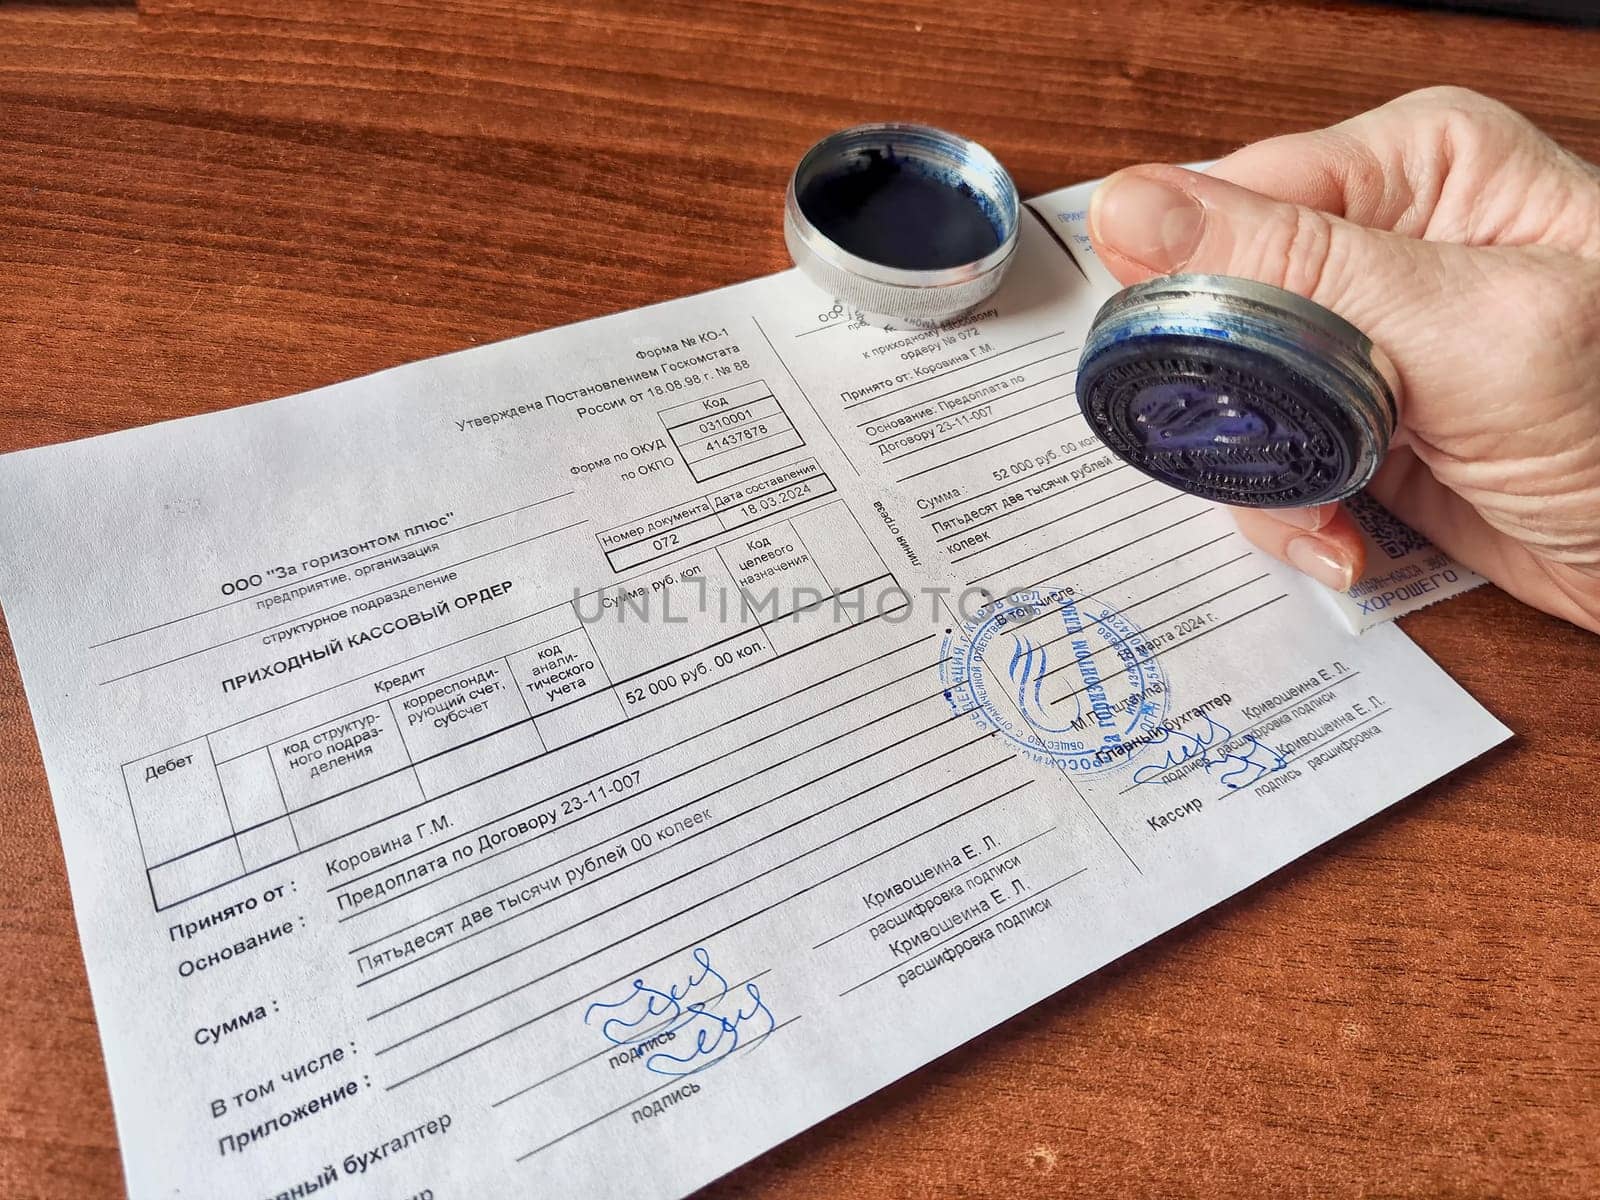 Kirov, Russia - March 18, 2024: Close-up of hand pressing a seal onto paper. Woman Applying Seal to Official Document on Table